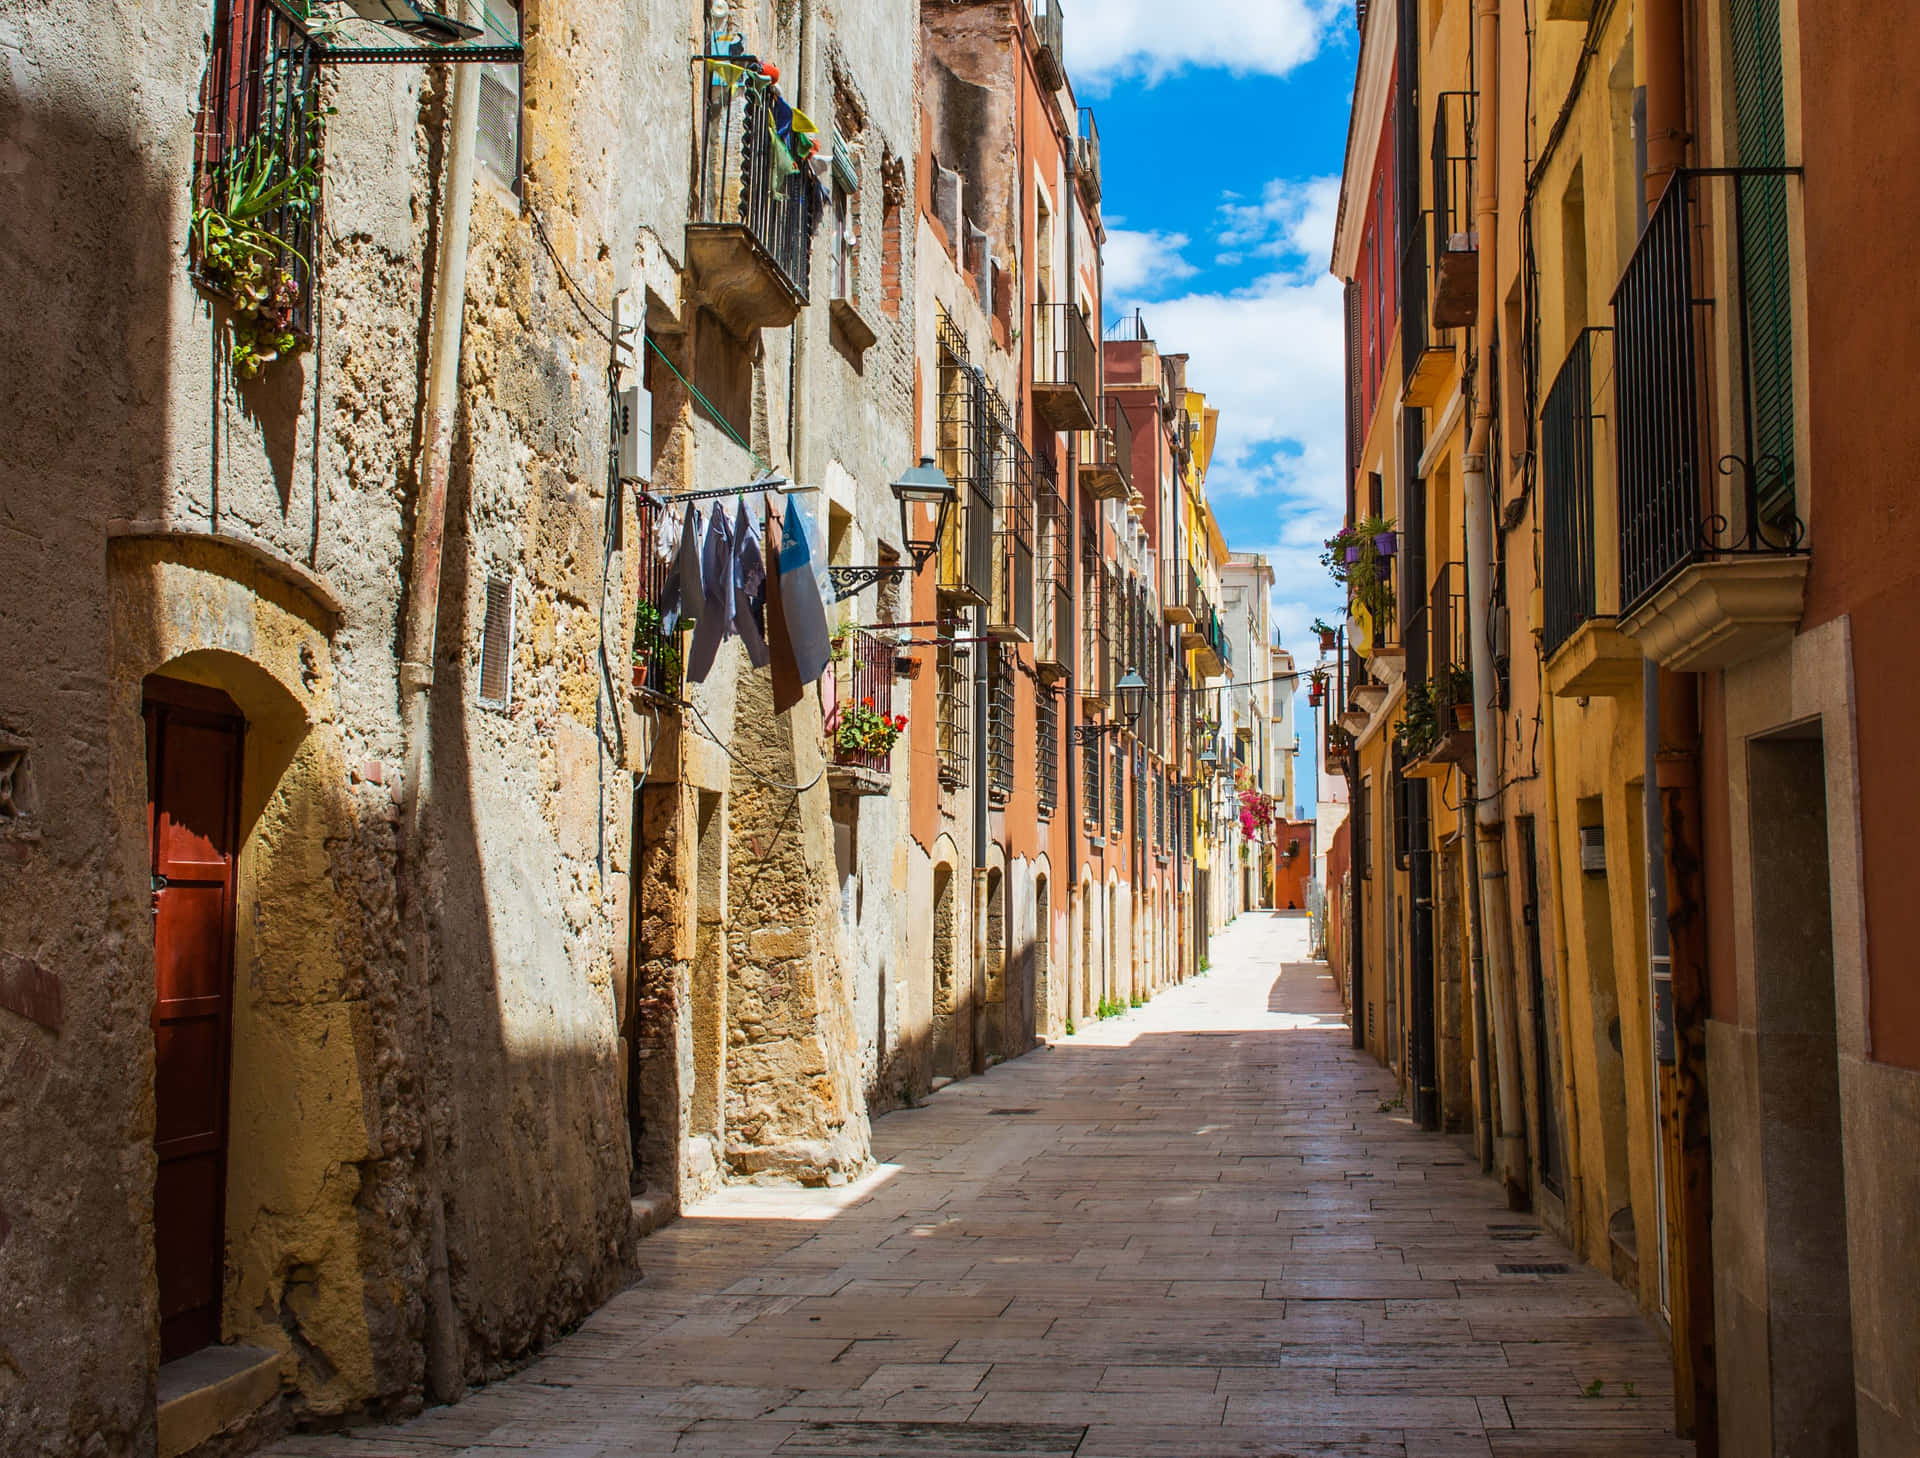 A Narrow Street With Buildings And A Laundry Line Wallpaper